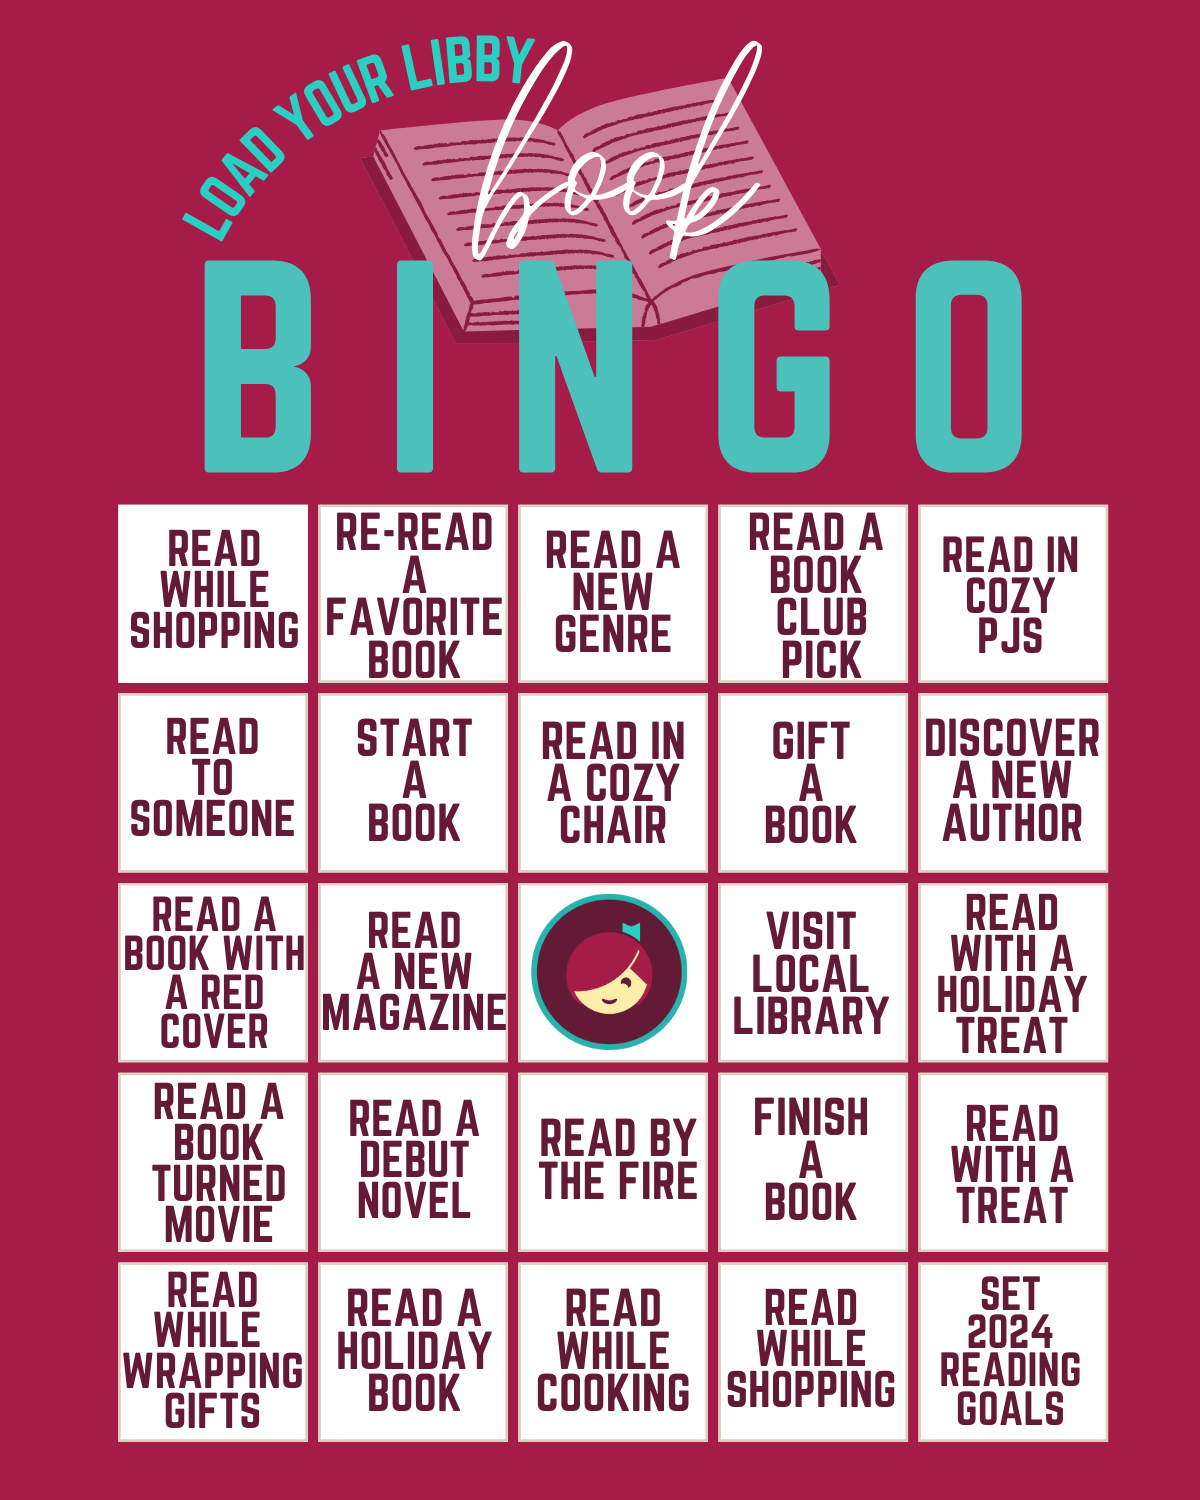 Have Some Fun with BOOK BINGO and the LibbyApp!